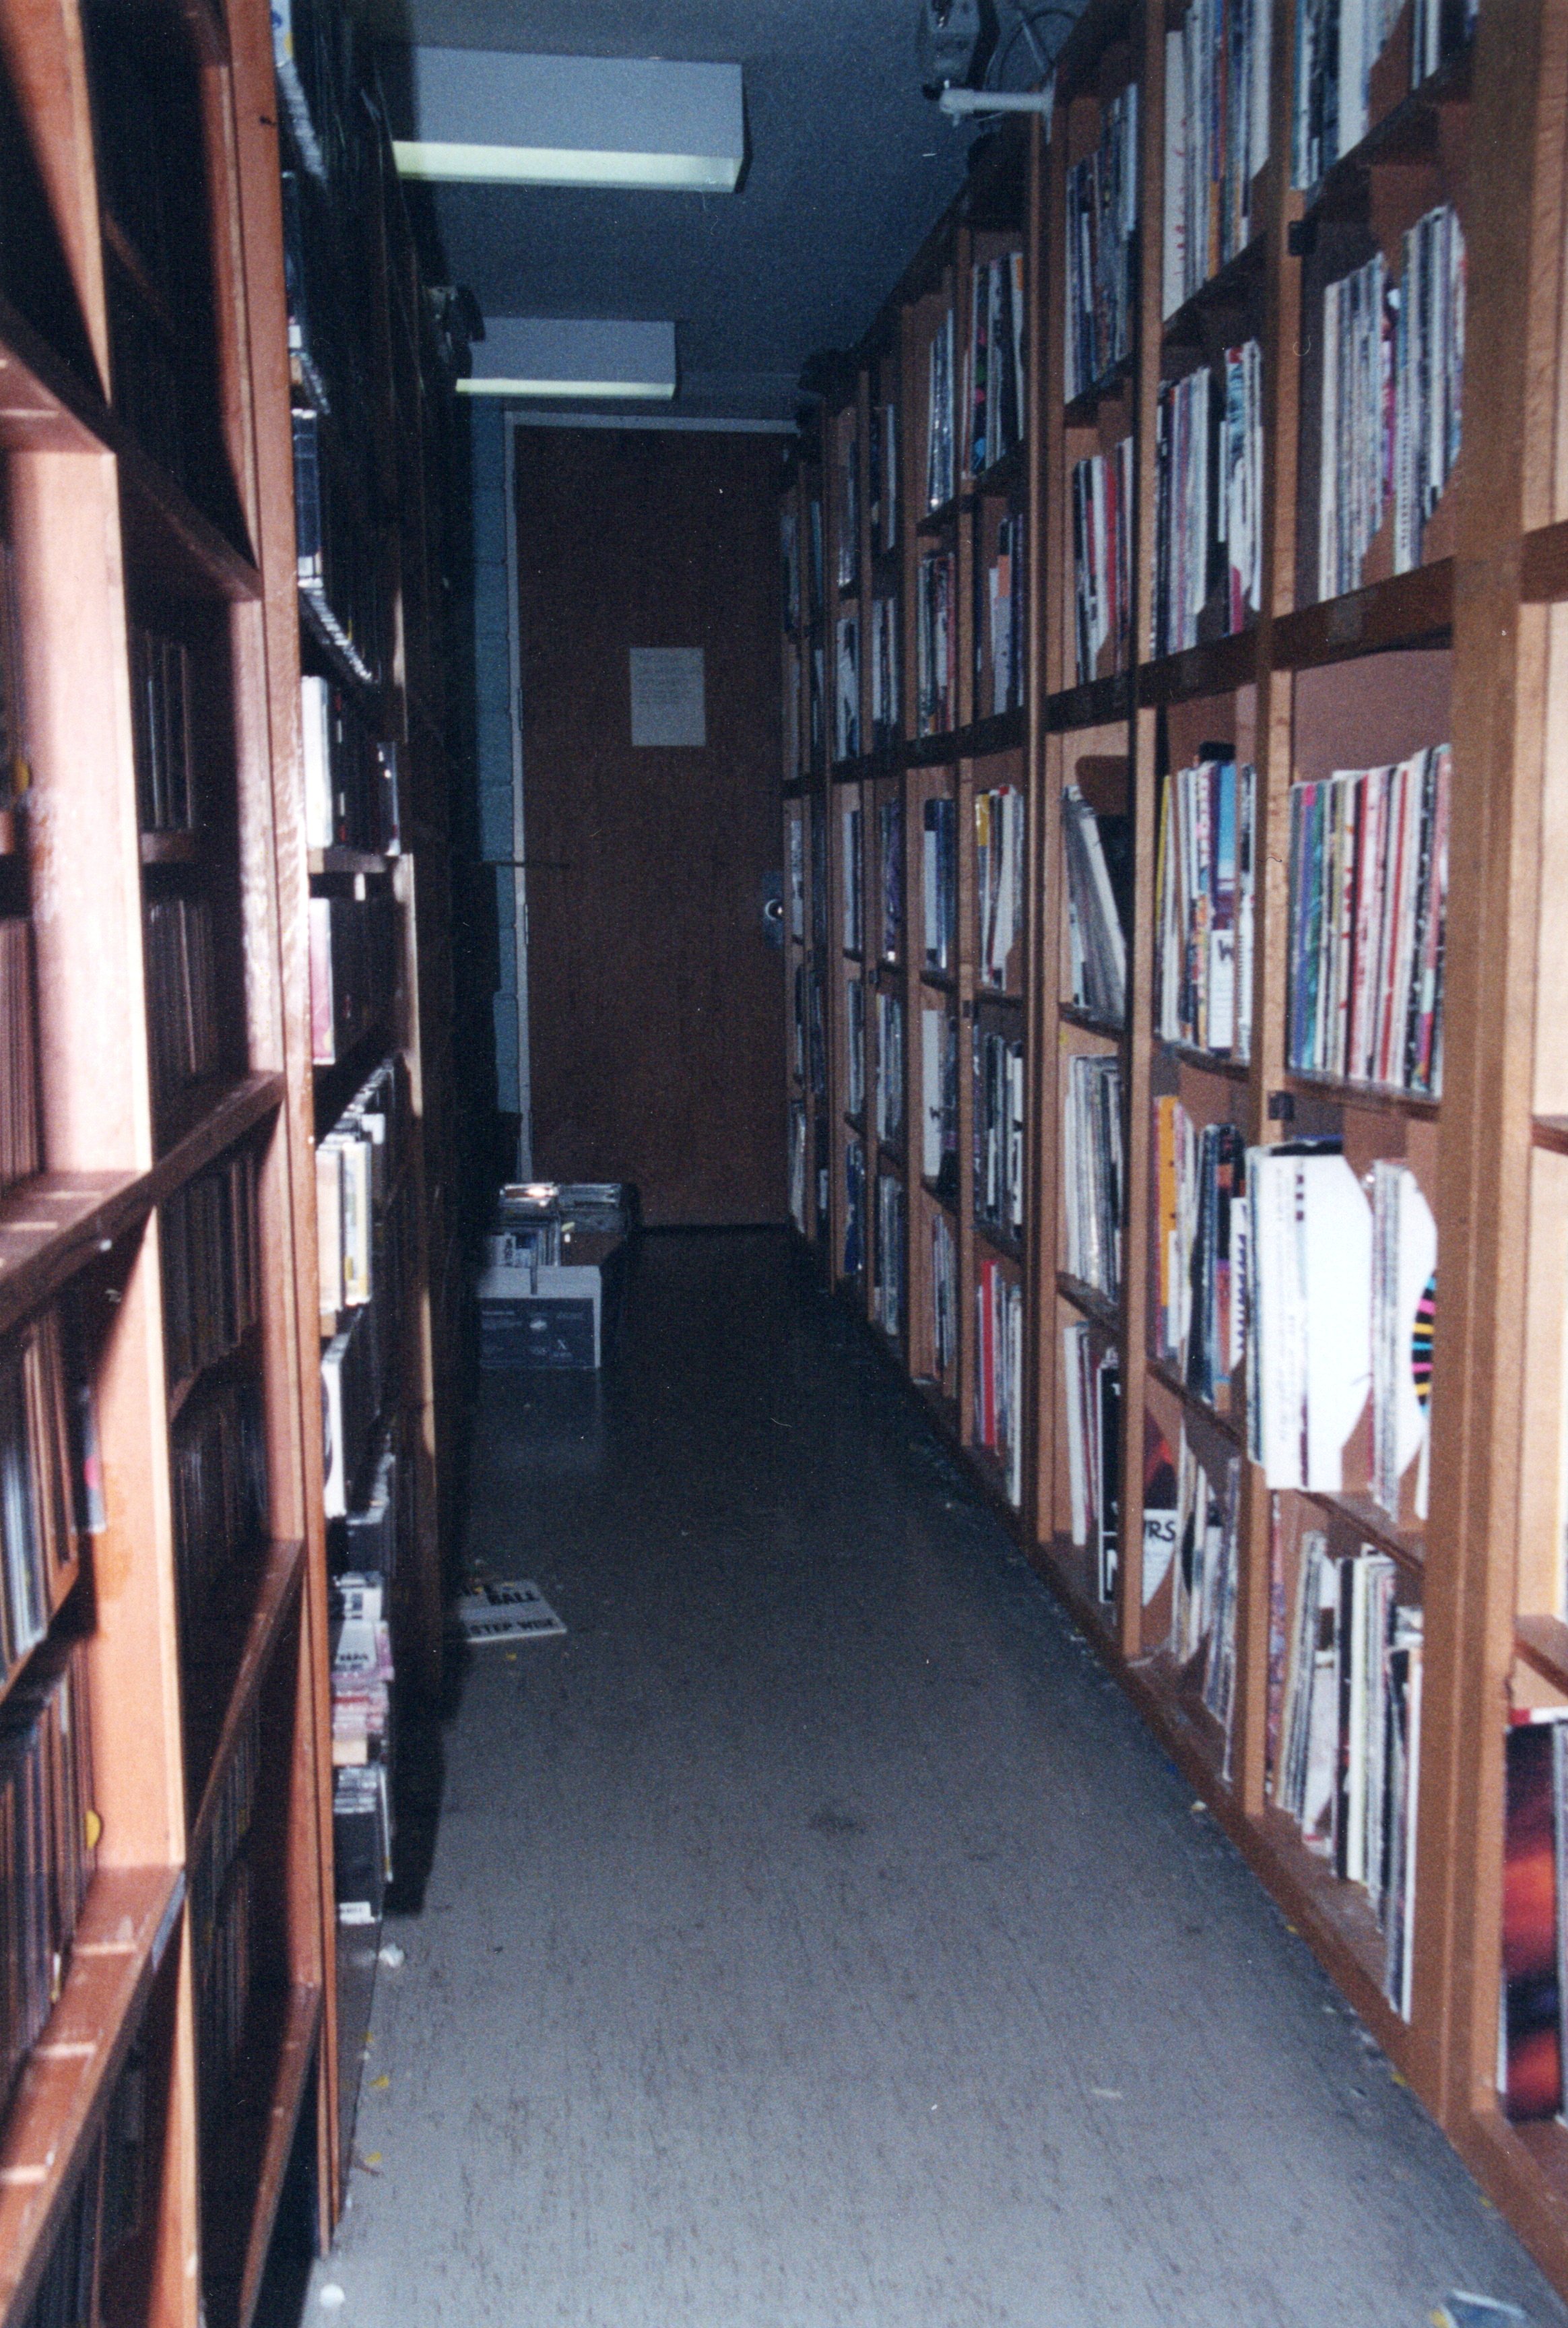 2002 - Record Library